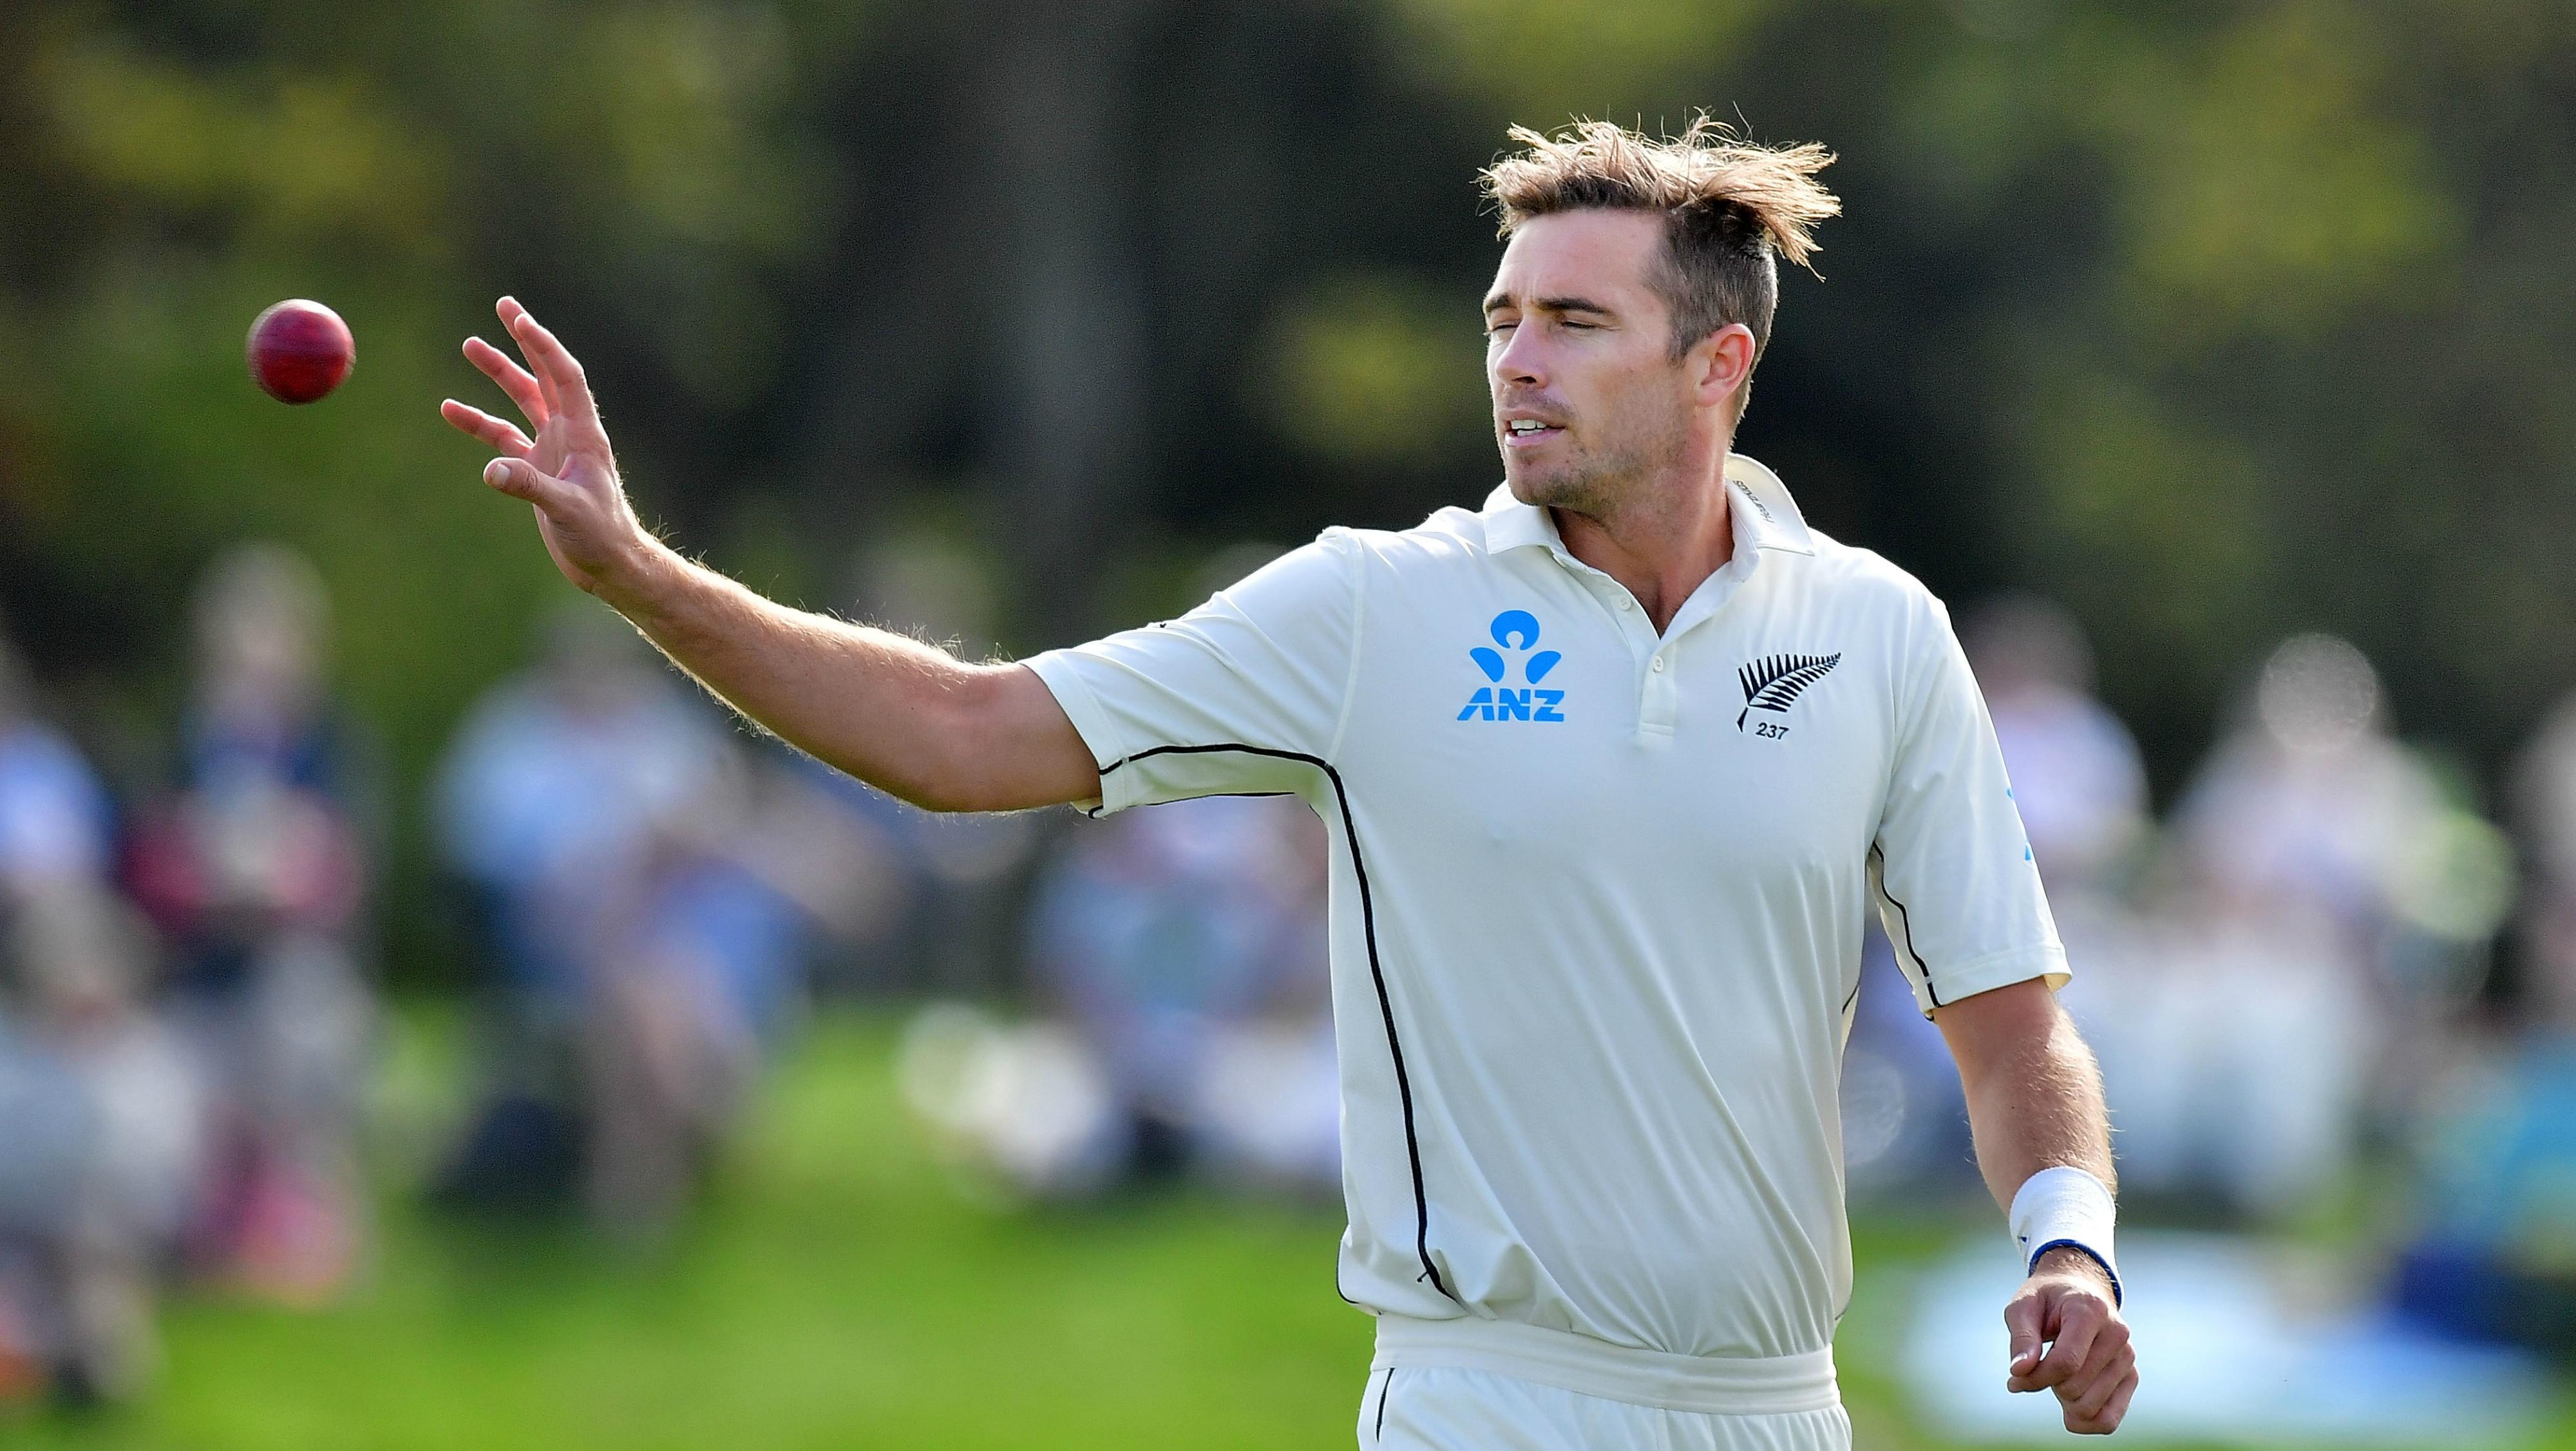 'Nice to be back in conditions we're used to': Southee